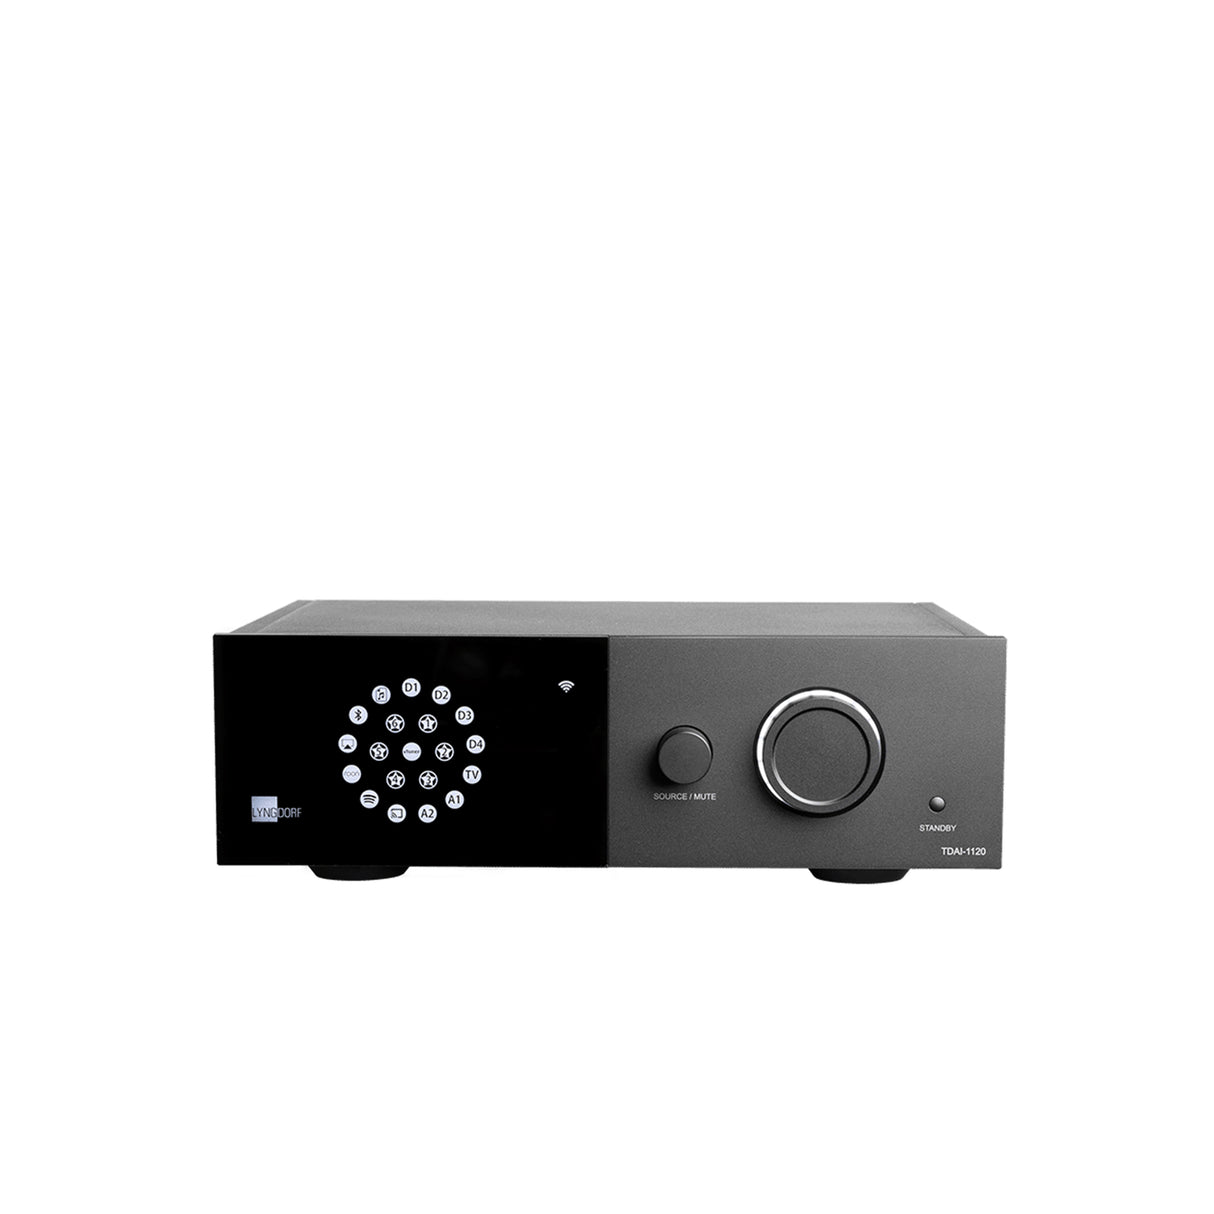 Lyngdorf TDAI 1120 - Integrated Amplifier Streamer